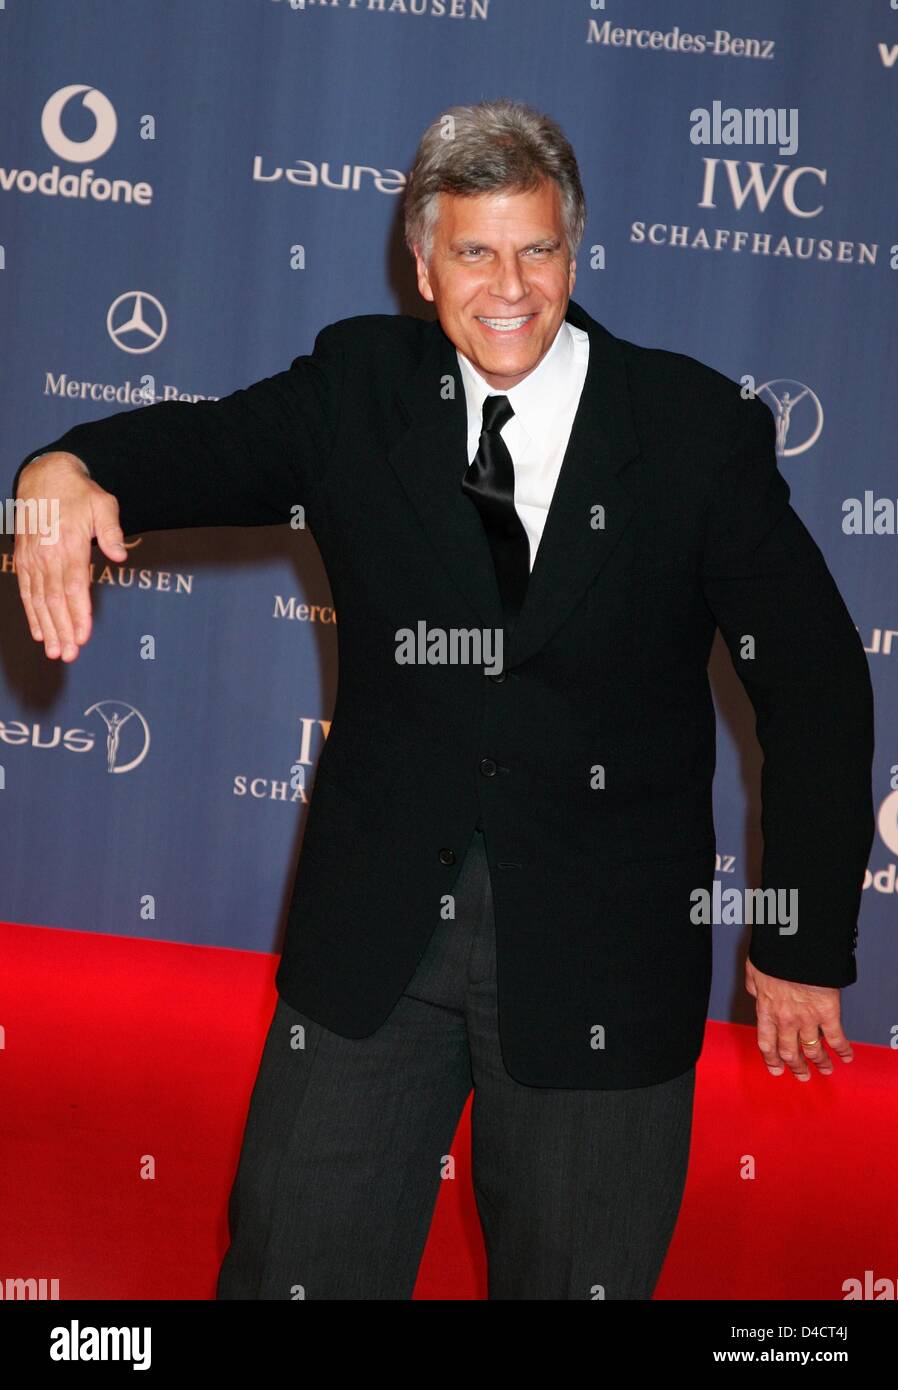 Former US world class swimmer Mark Spitz arrives at the 'Laureus World Sports Awards' in Saint Petersburg, Russian Federation, 17 February 2008. Outstanding athletes, who had been selected by a jury comprised of former top athletes, were awarded the Laureus Sports Award on 18 February. Photo: GERO BRELOER Stock Photo